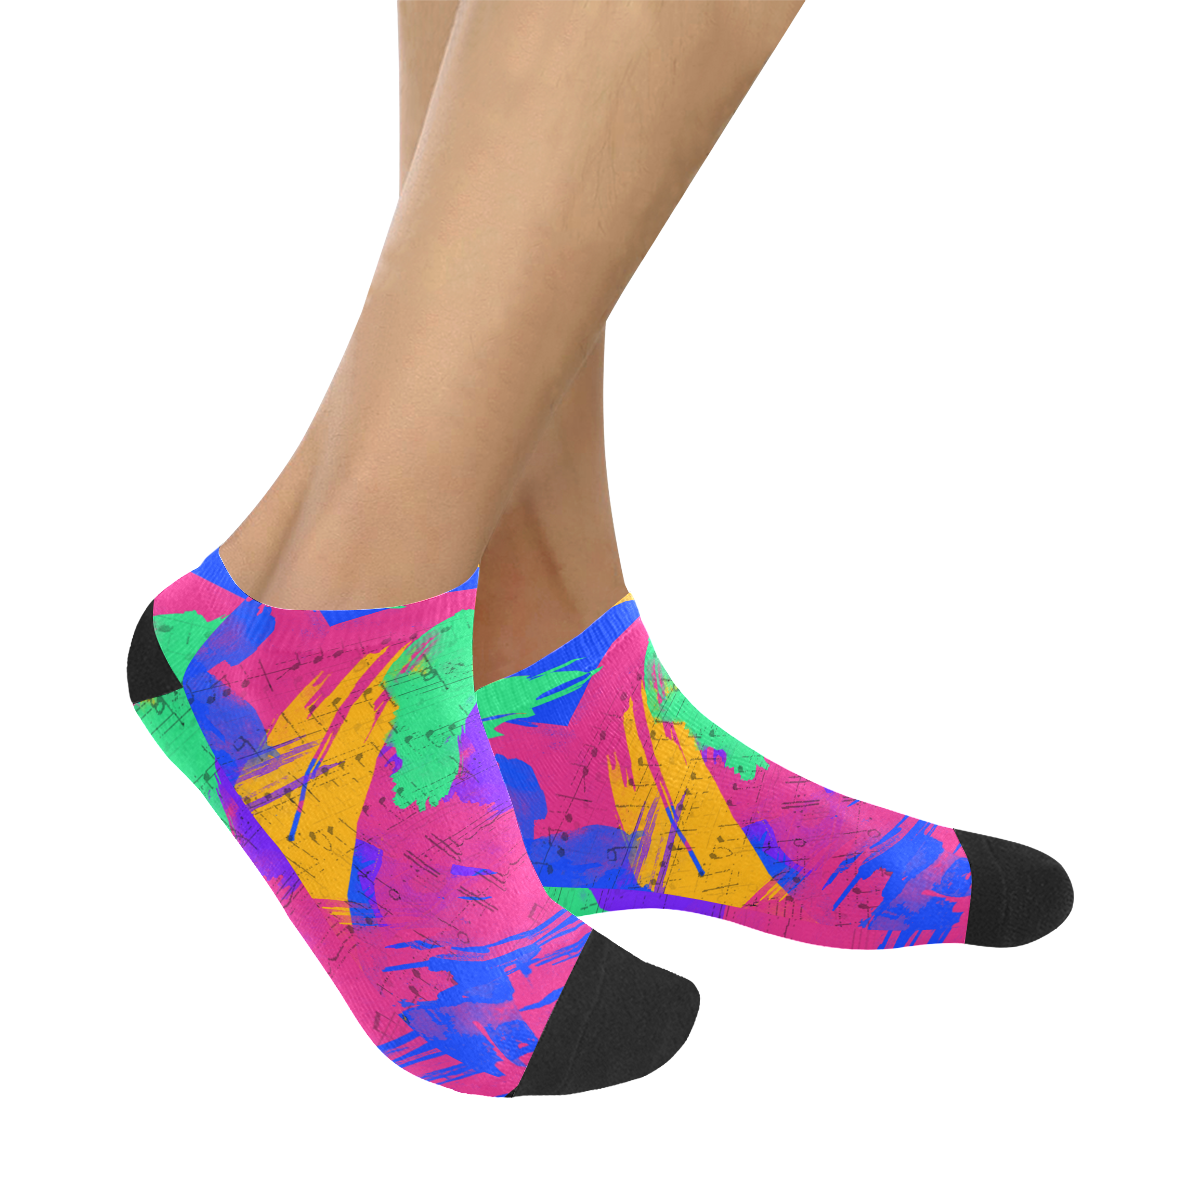 Groovy Paint Brush Strokes with Music Notes Women's Ankle Socks